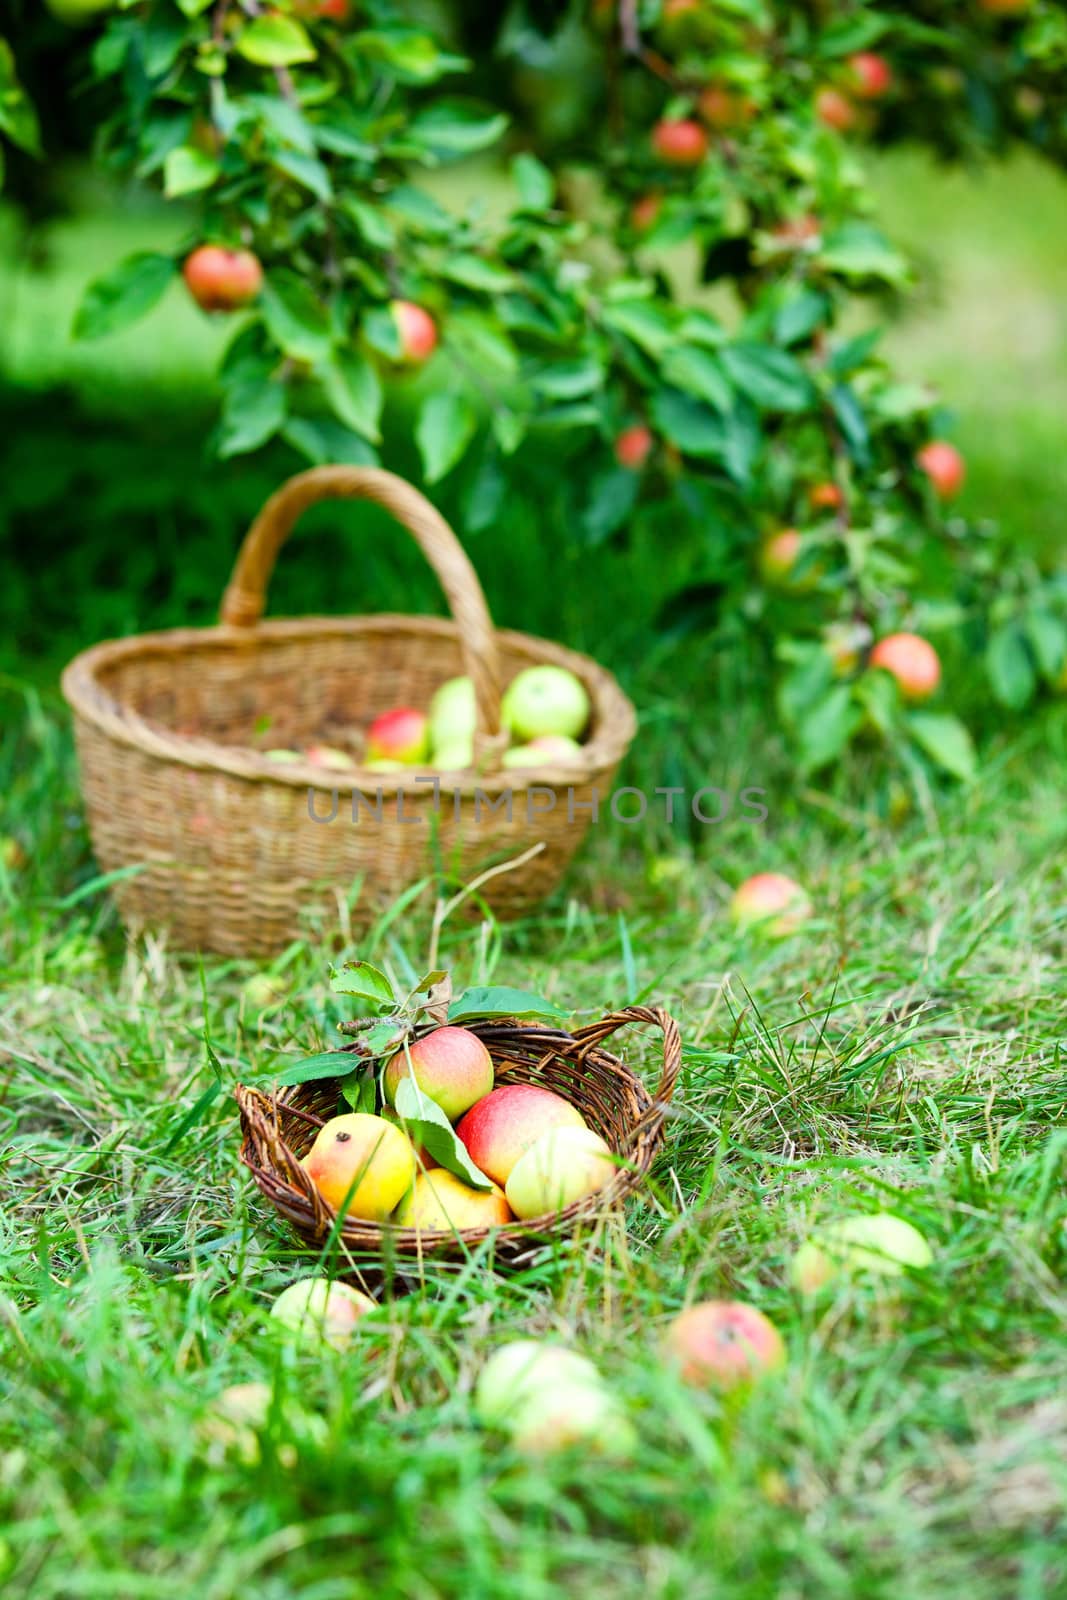 Organic red and yellow apples in the basket. Autumn at the rural garden.